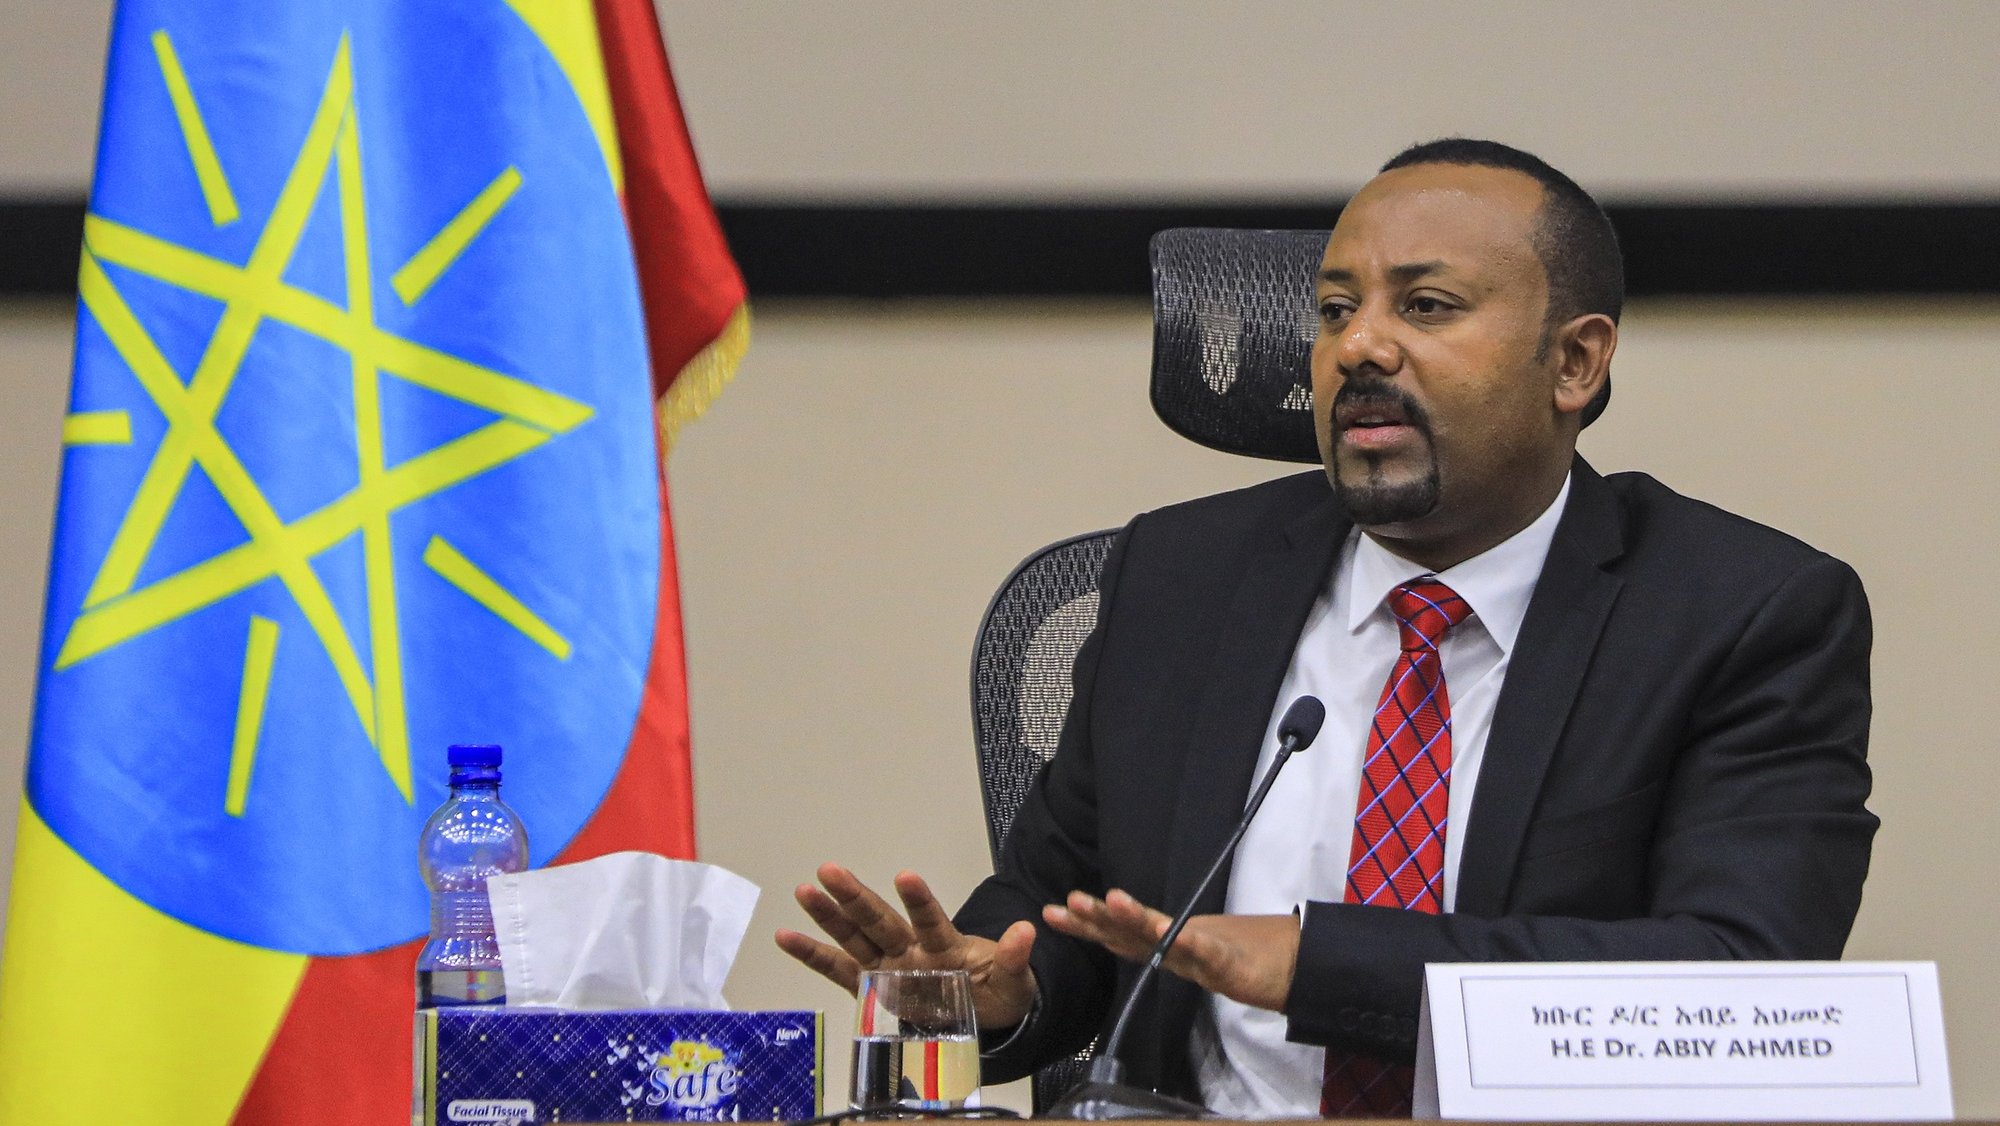 epaselect epa08852858 Ethiopian Prime Minister Abiy Ahmed speaks during a question and answer session in parliament, Addis Ababa, Ethiopia 30 November 2020. Ethiopiaâ€™s military intervention in the northern Tigray region comes after Tigray People&#039;s Liberation Front (TPLF) forces allegedly attacked an army base on 03 November 2020 sparking weeks of unrest with over 40,000 refugees fleeing to Sudan.  EPA/STR